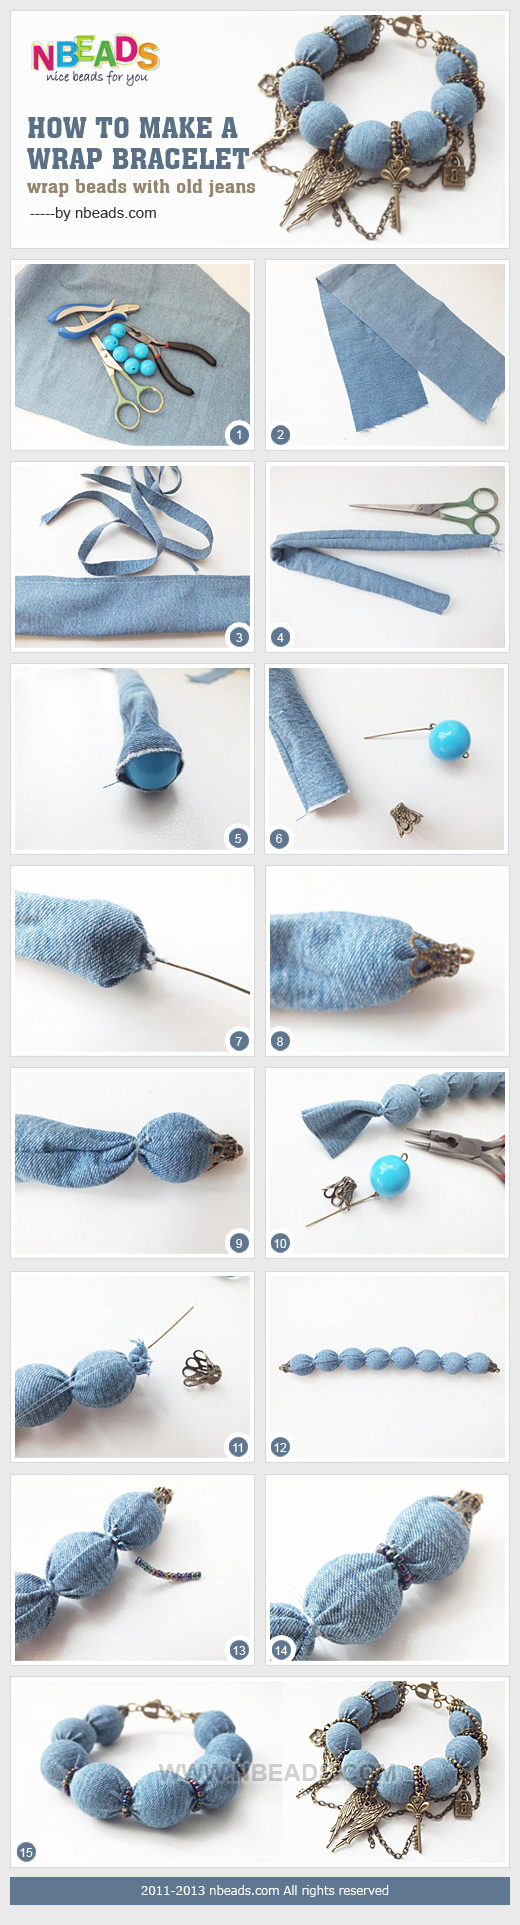 how to make a wrap bracelet - wrap beads with old jeans